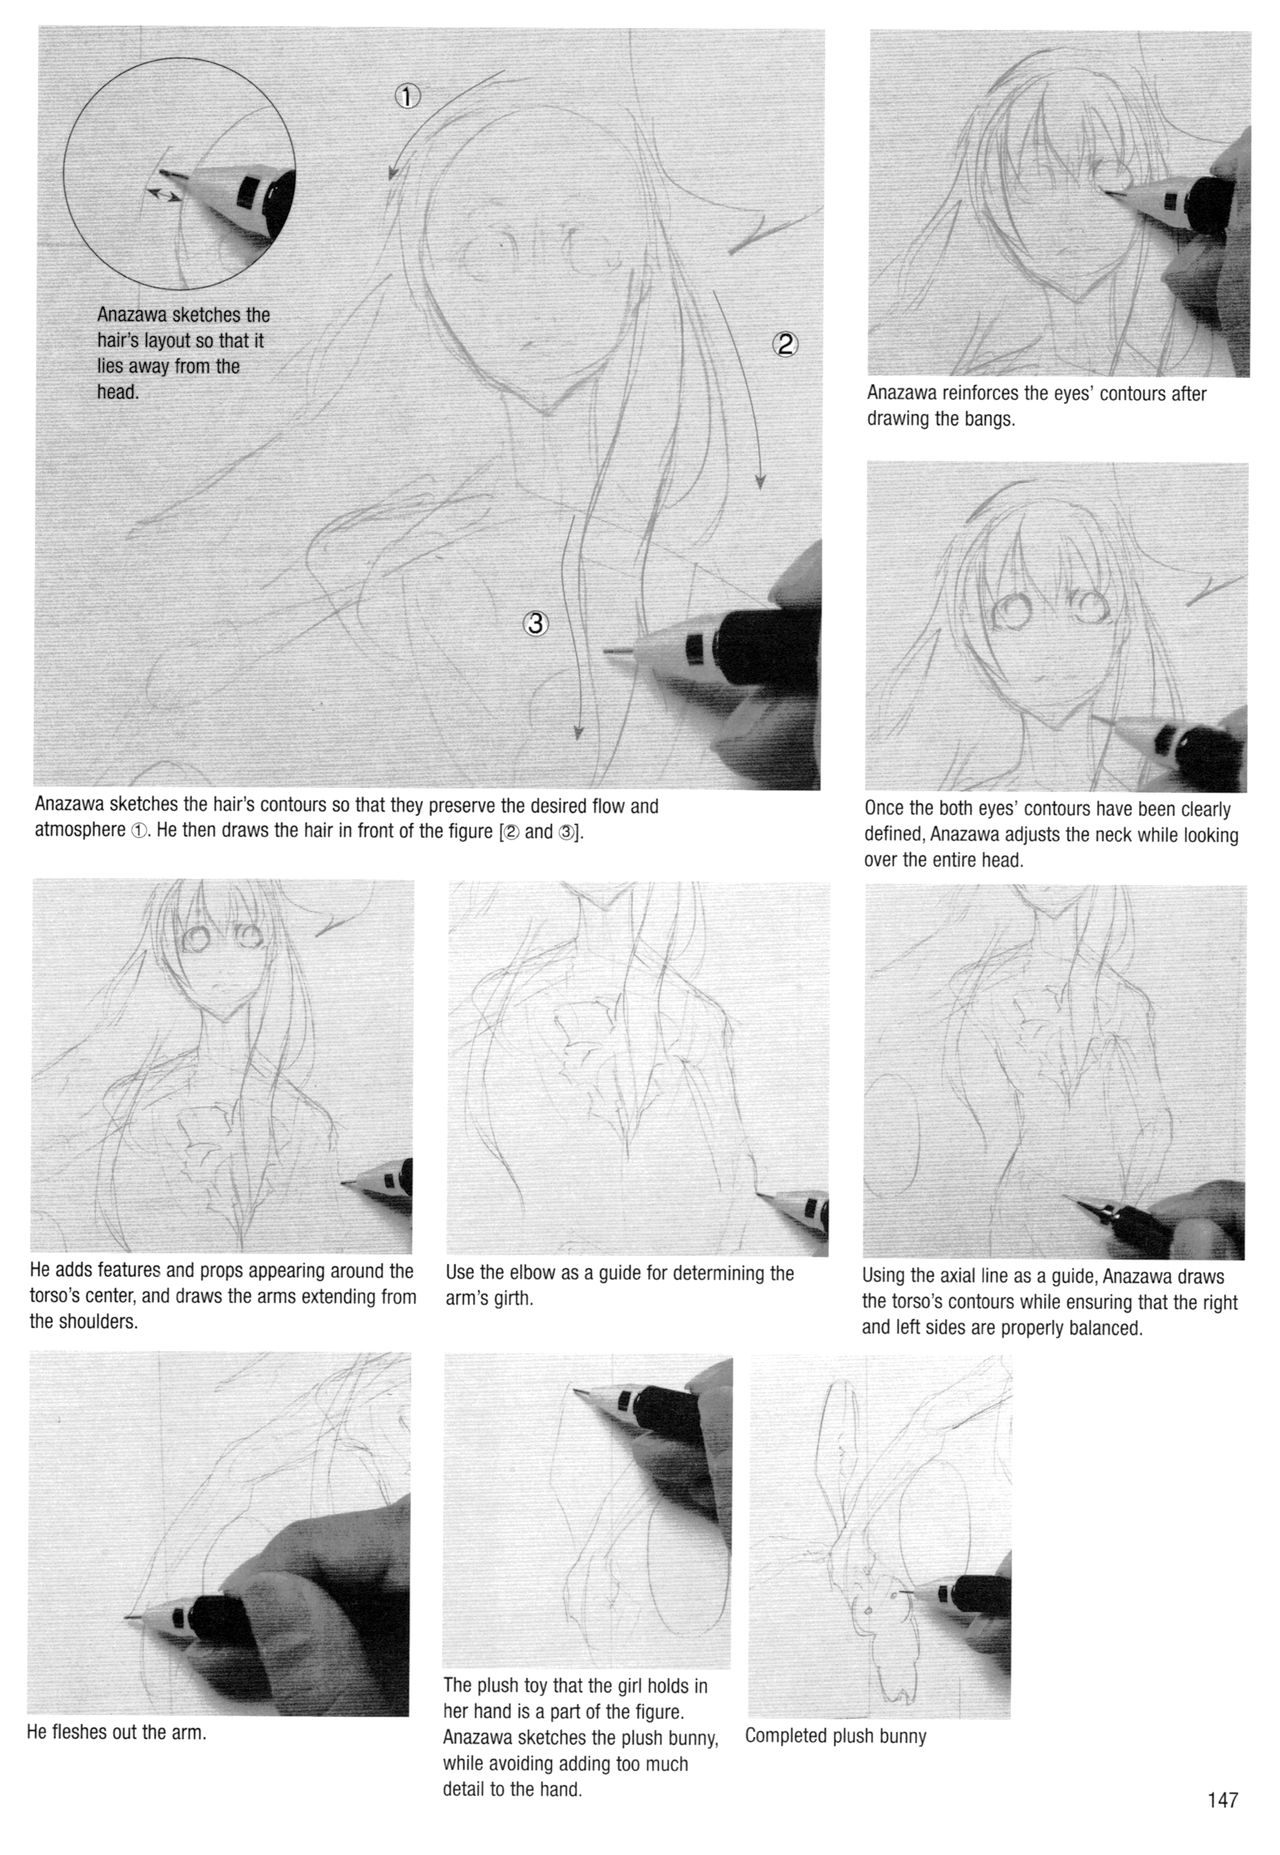 Sketching Manga-Style Vol. 3 - Unforgettable Characters 146